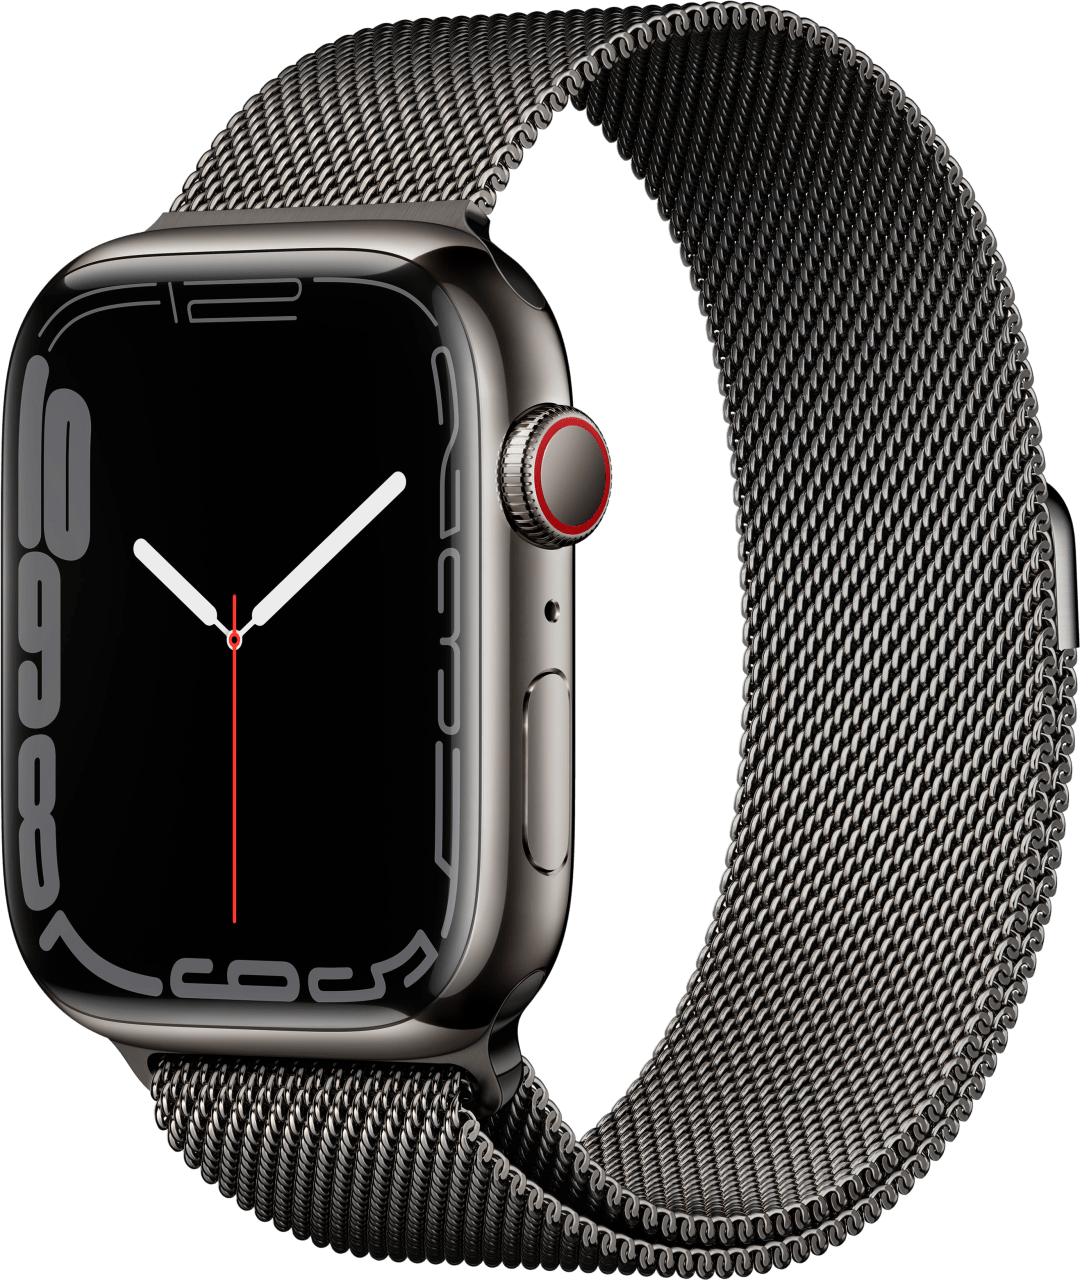 Grafito Apple Watch Series 7 GPS + Cellular, 45mm, Stainless Steel Case and Milanese Loop.1